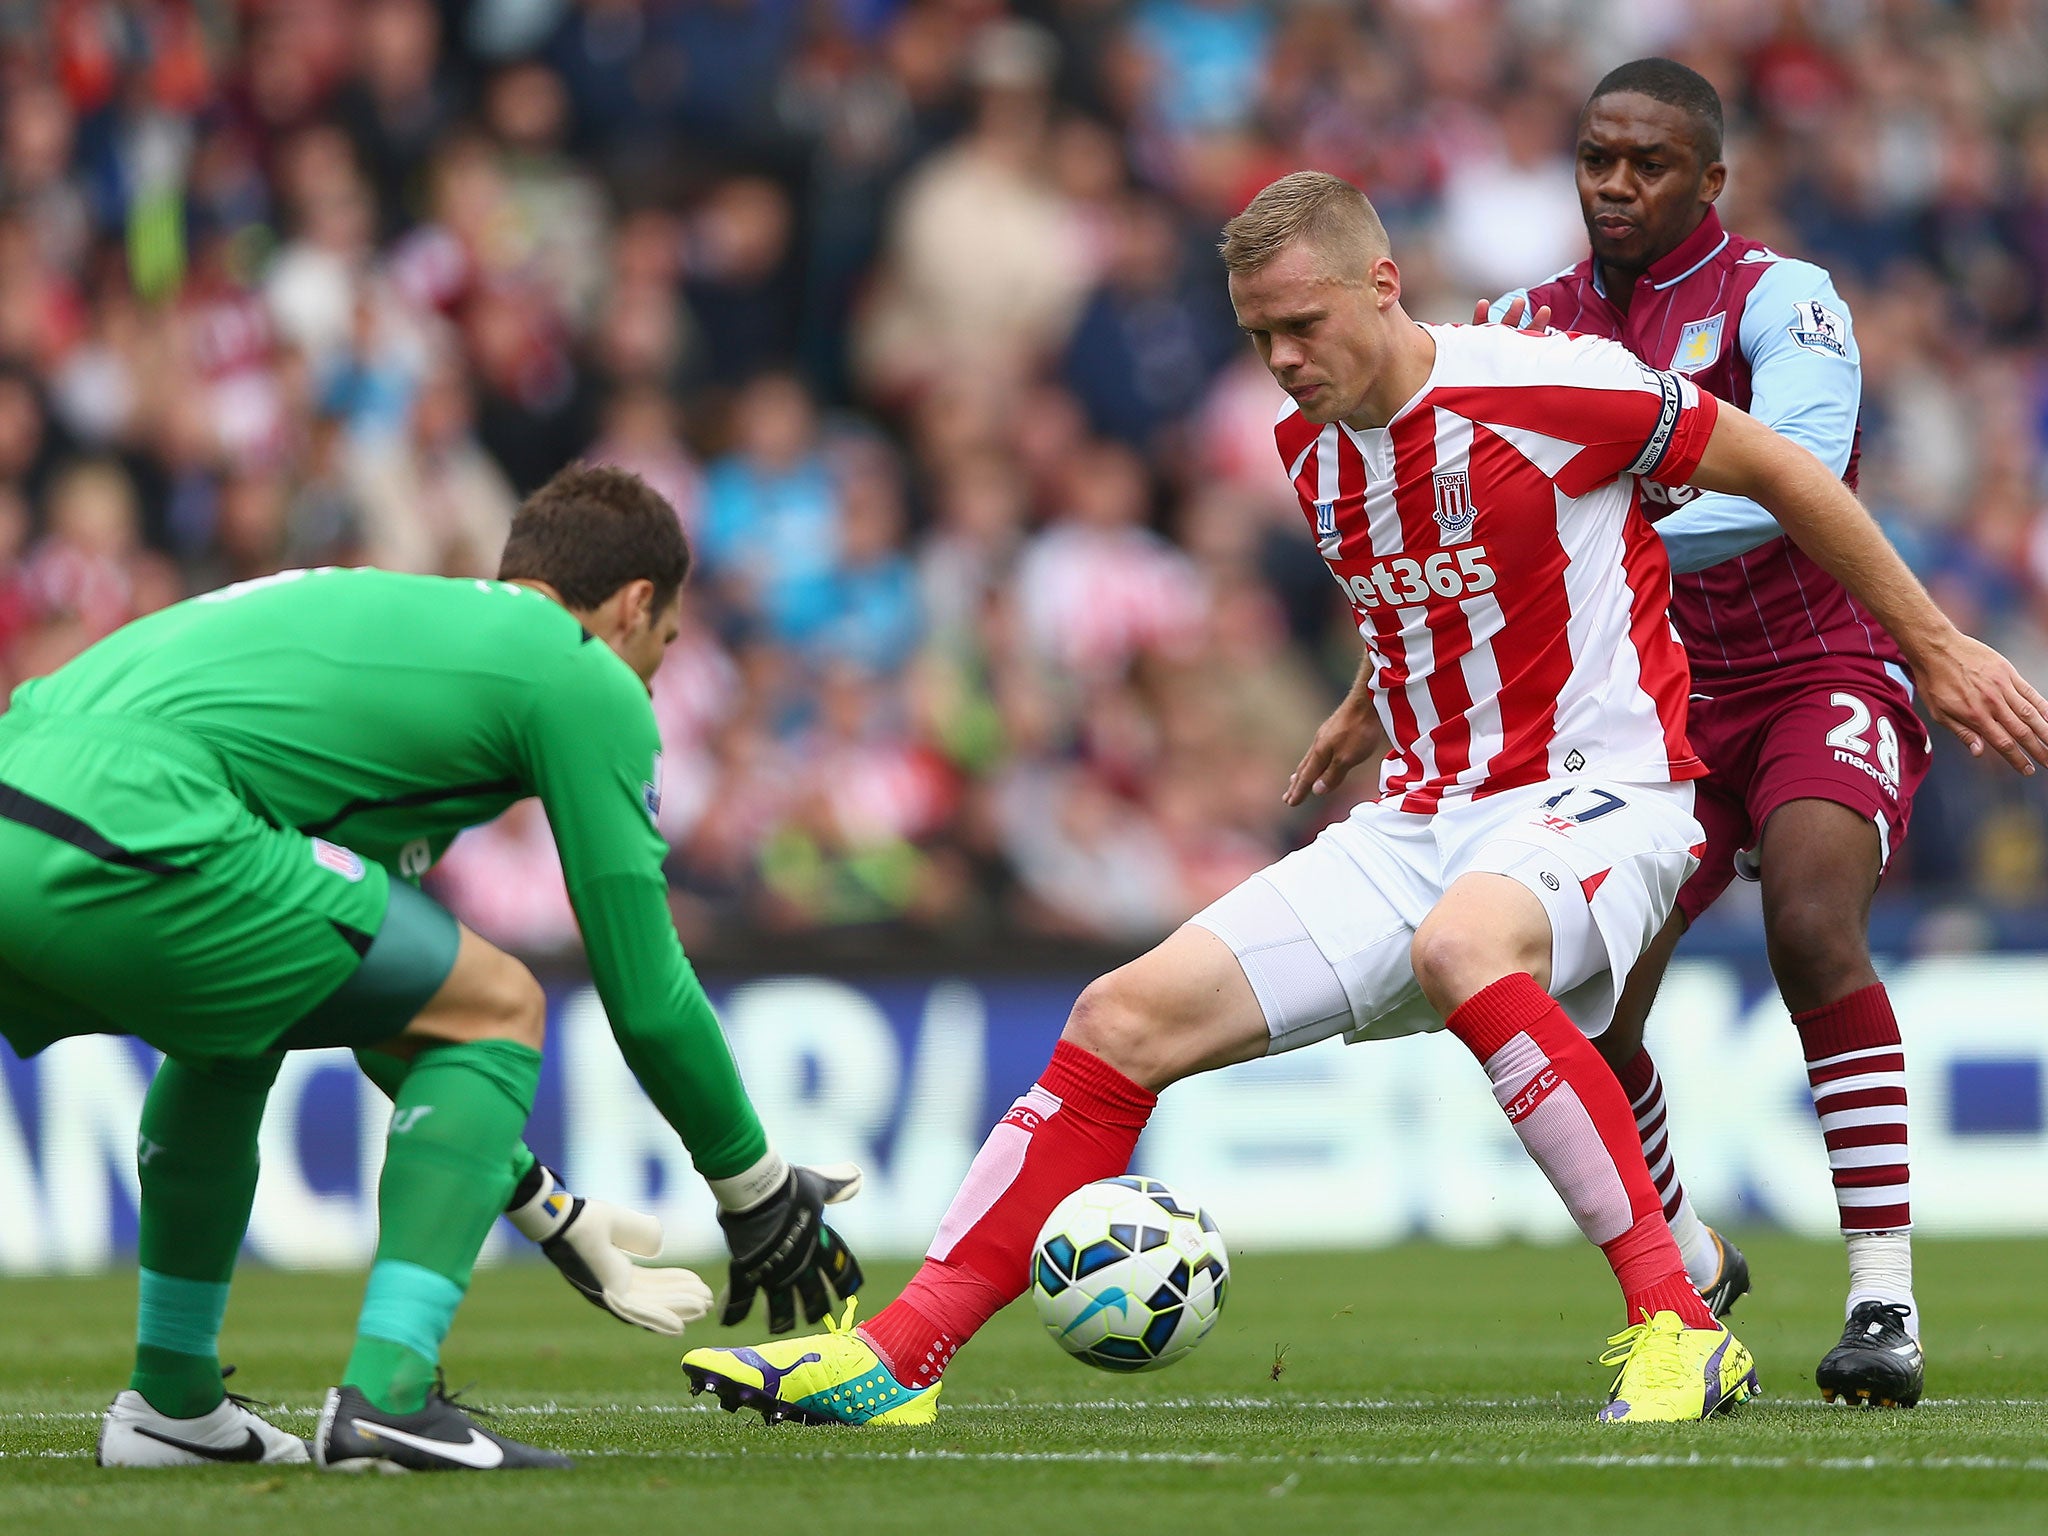 Stoke City skipper Ryan Shawcross shields the ball from Charles N'Zogbia, allowing Asmir Begovic to safely collect